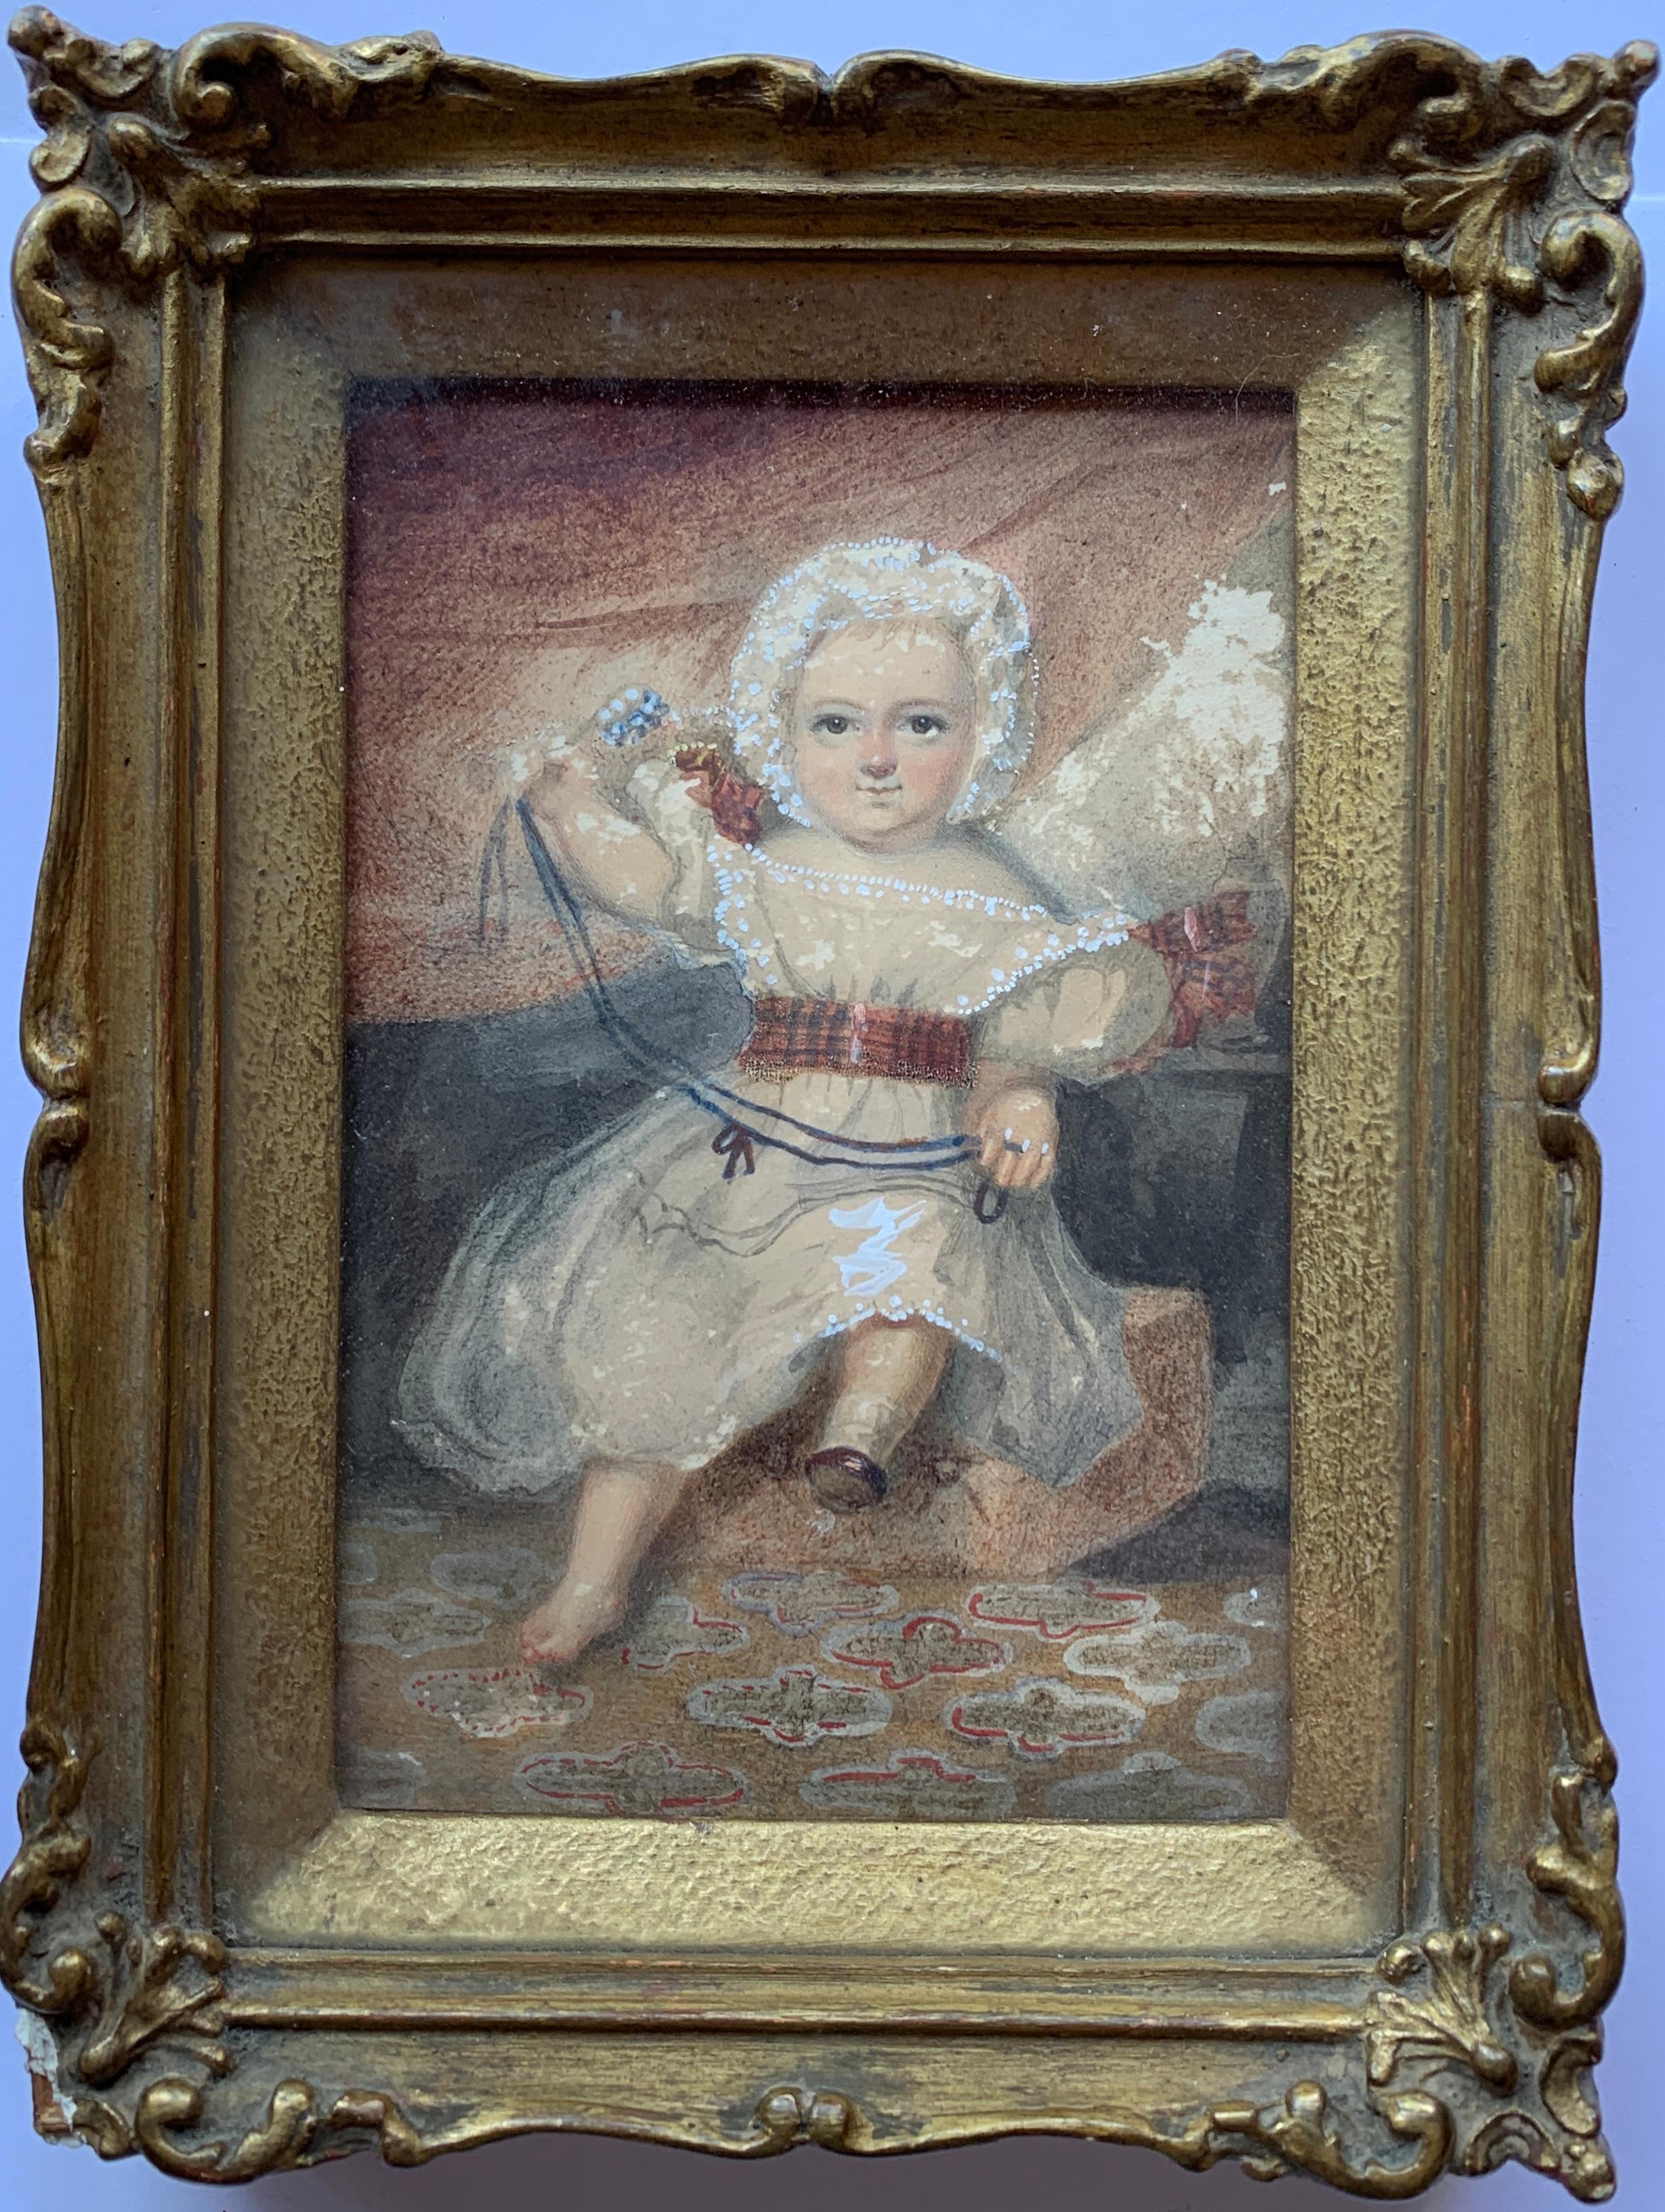 Unknown Figurative Art - Victorian Portrait of little baby Girl or Child playing with her toys